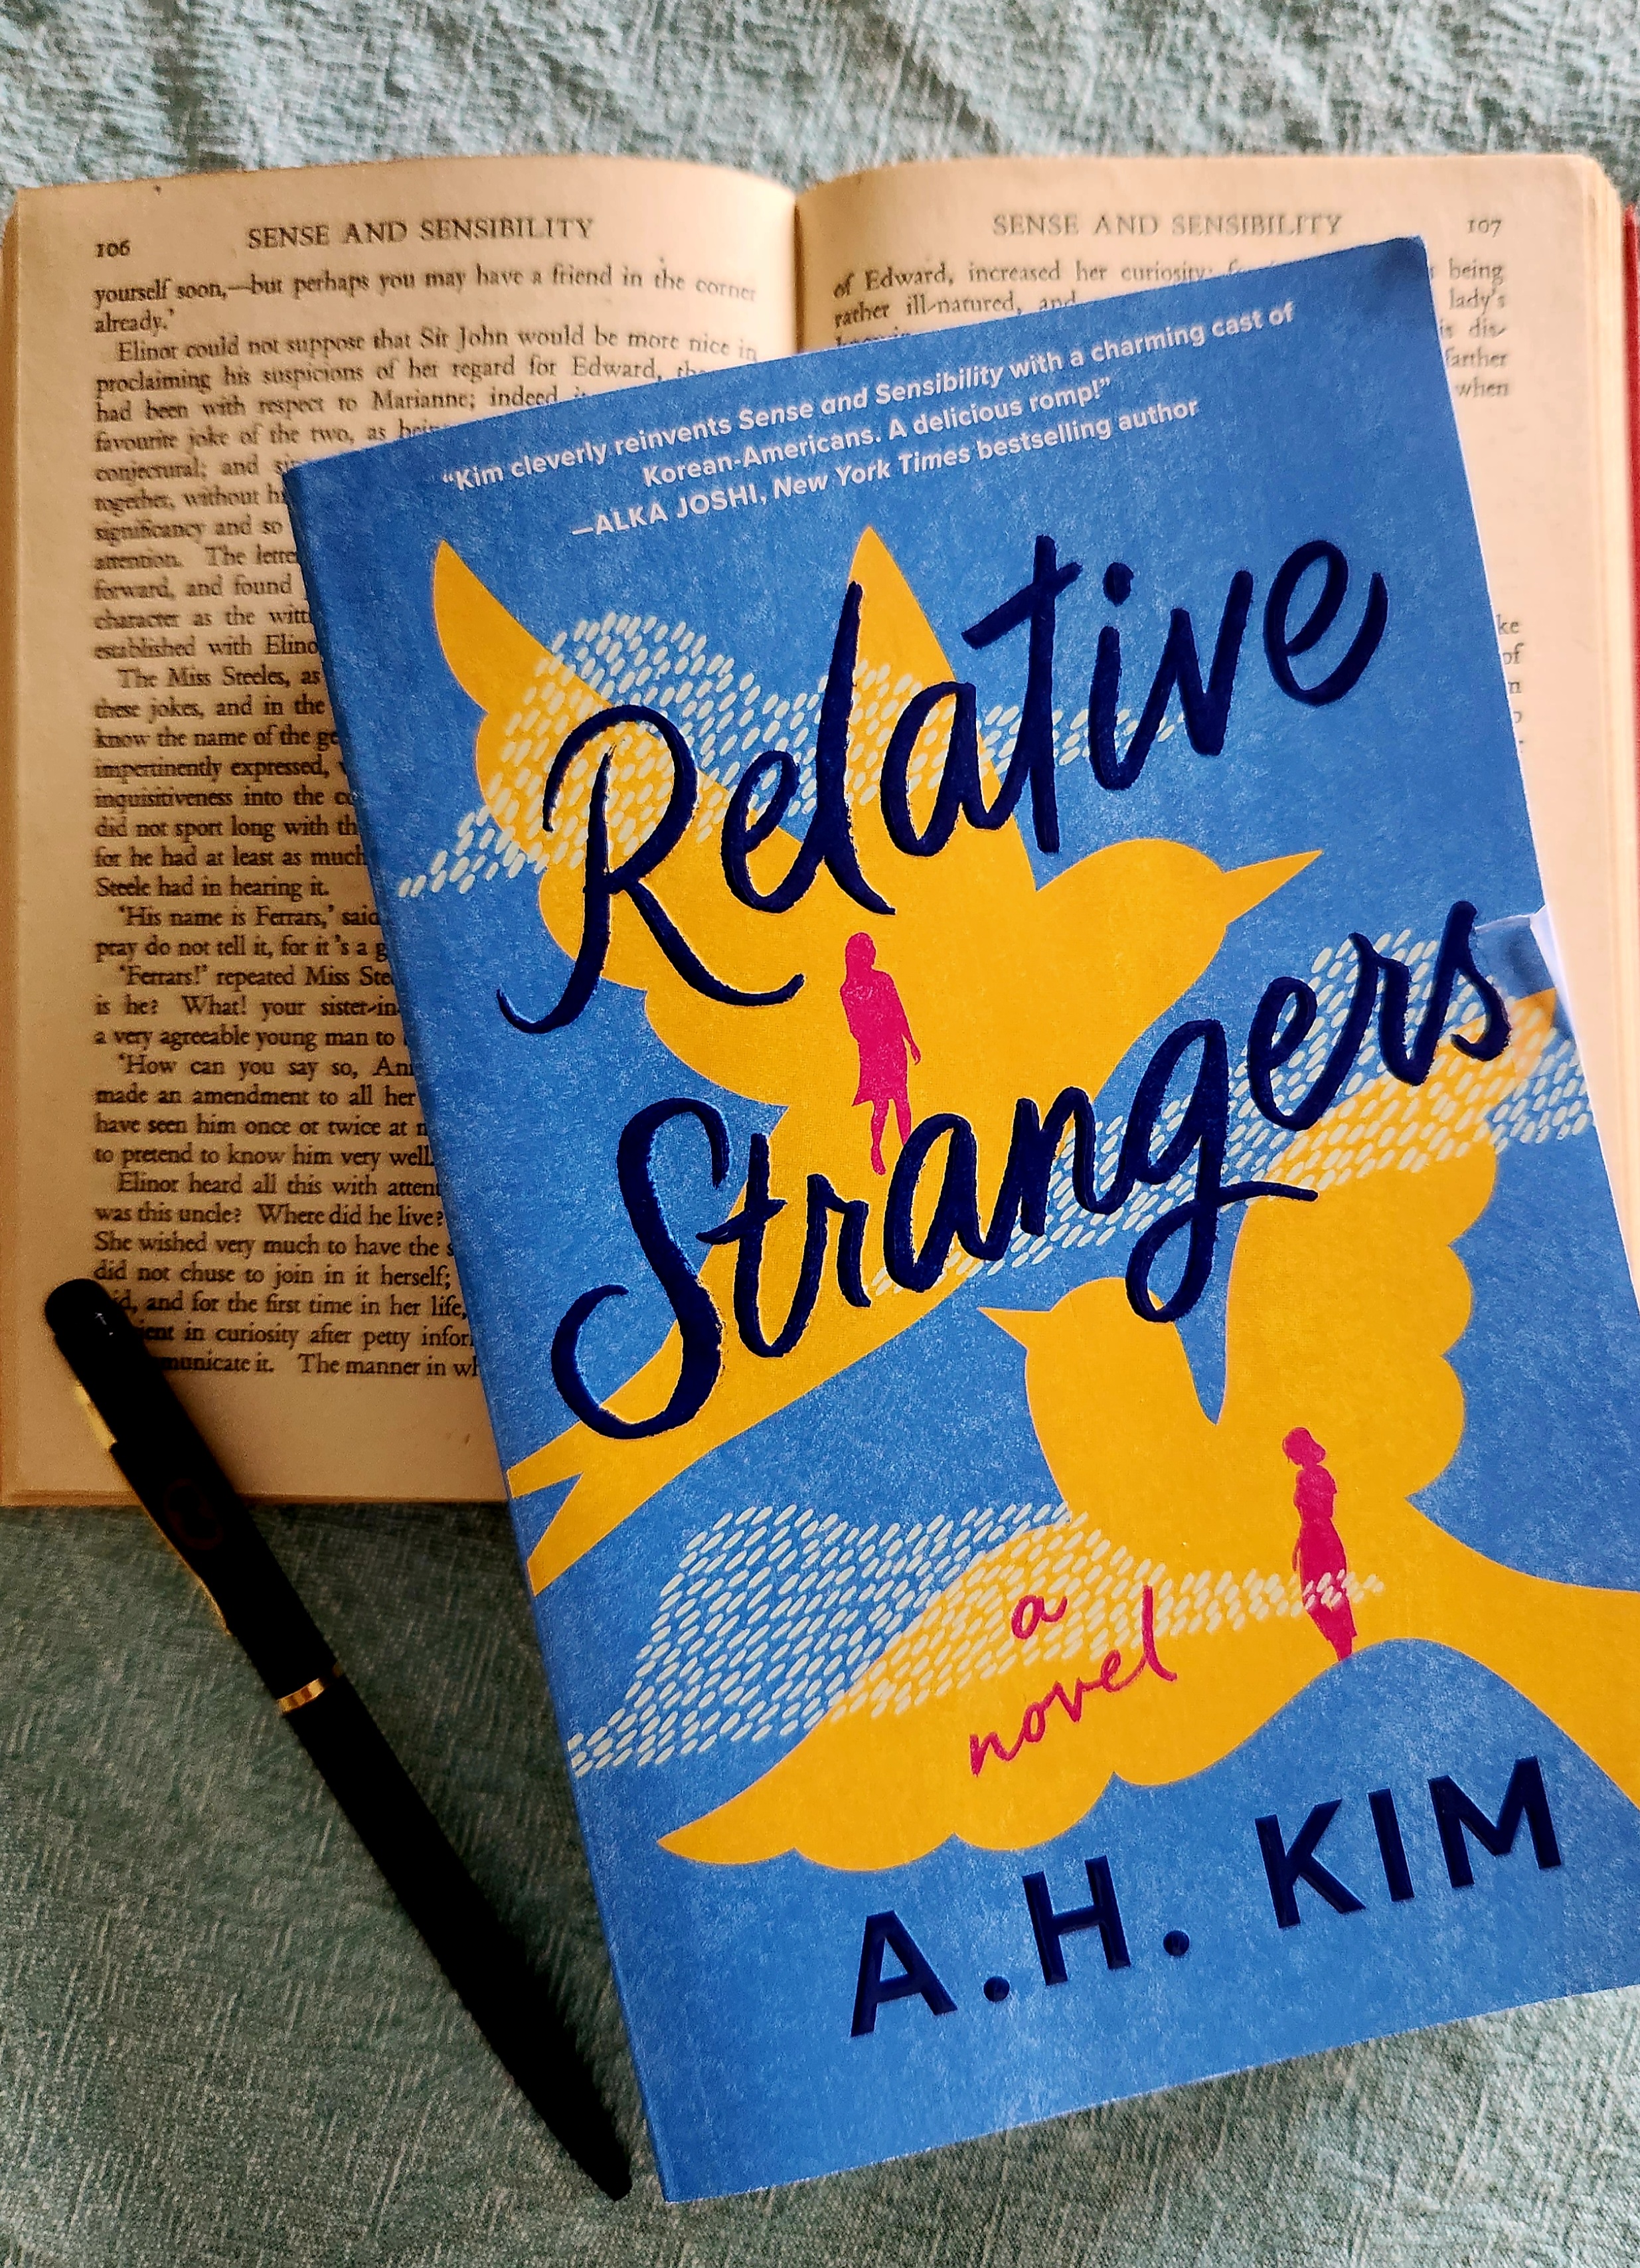 book cover of relative strangers by ah kim and sense and sensibility by jane austen in the background